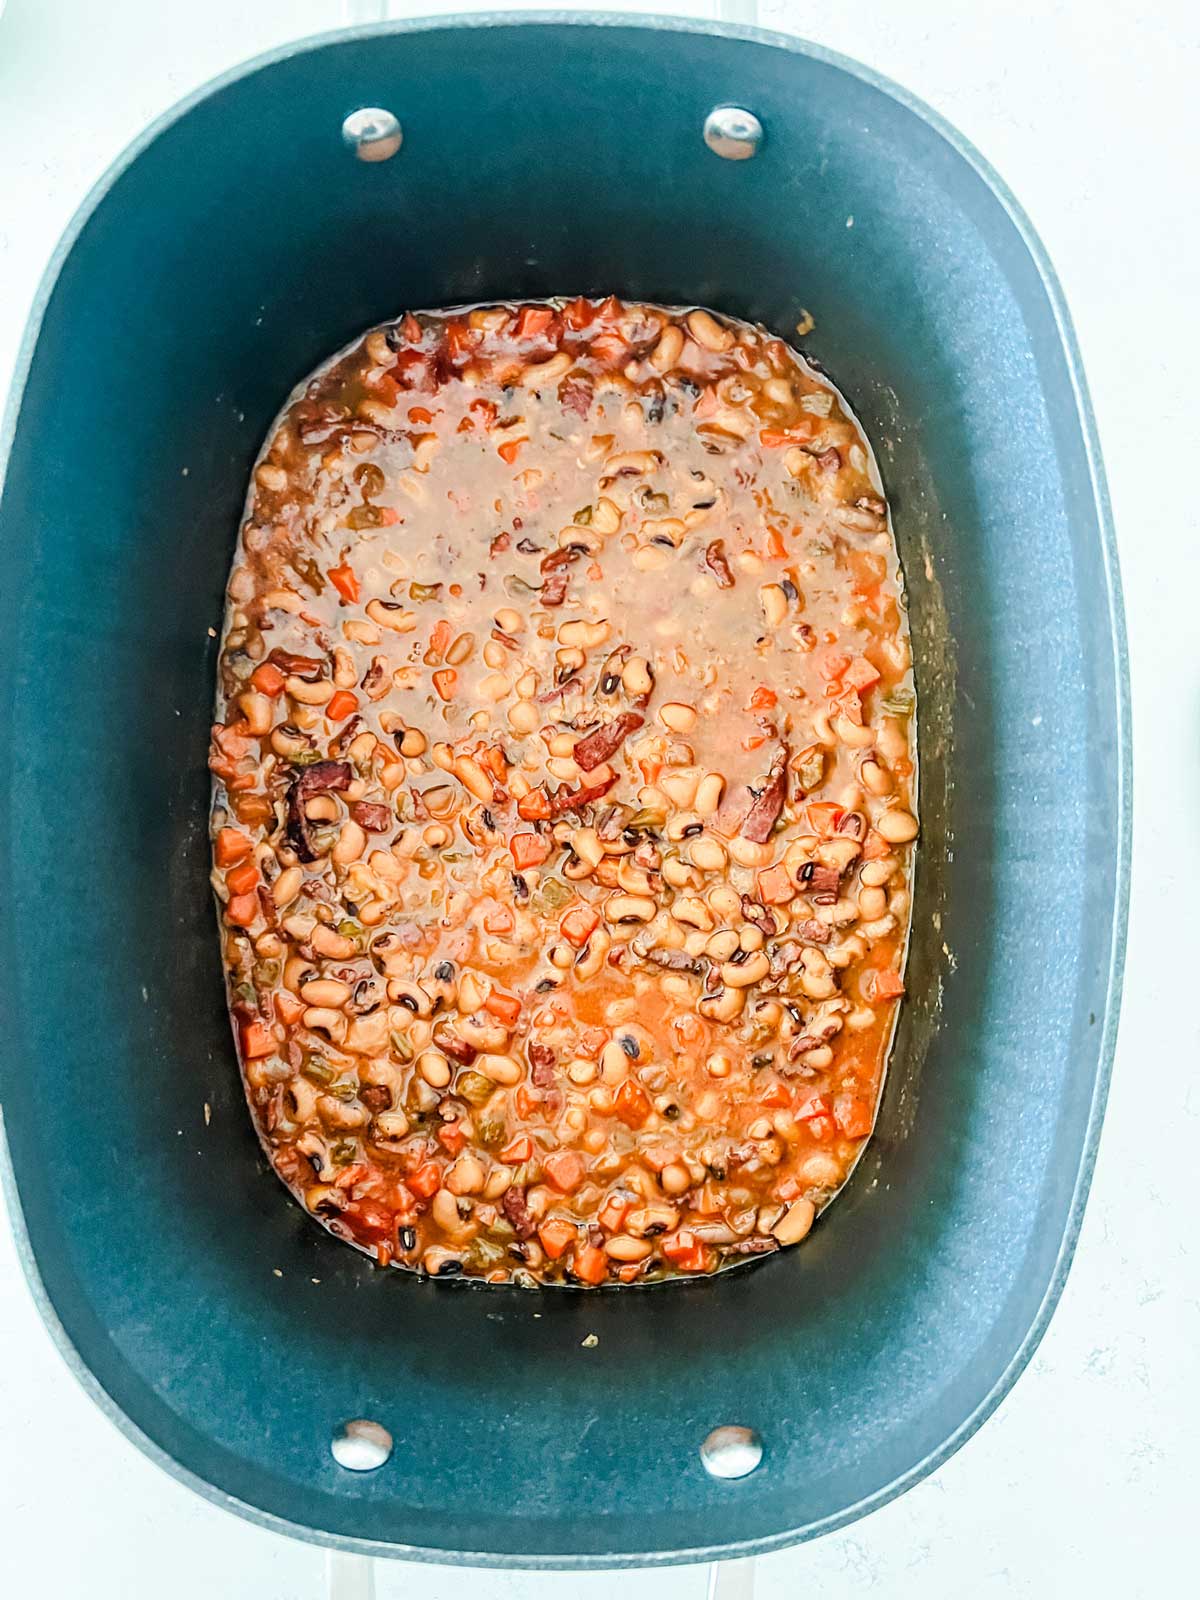 Black eyed peas in a slow cooker that they have been cooked in.